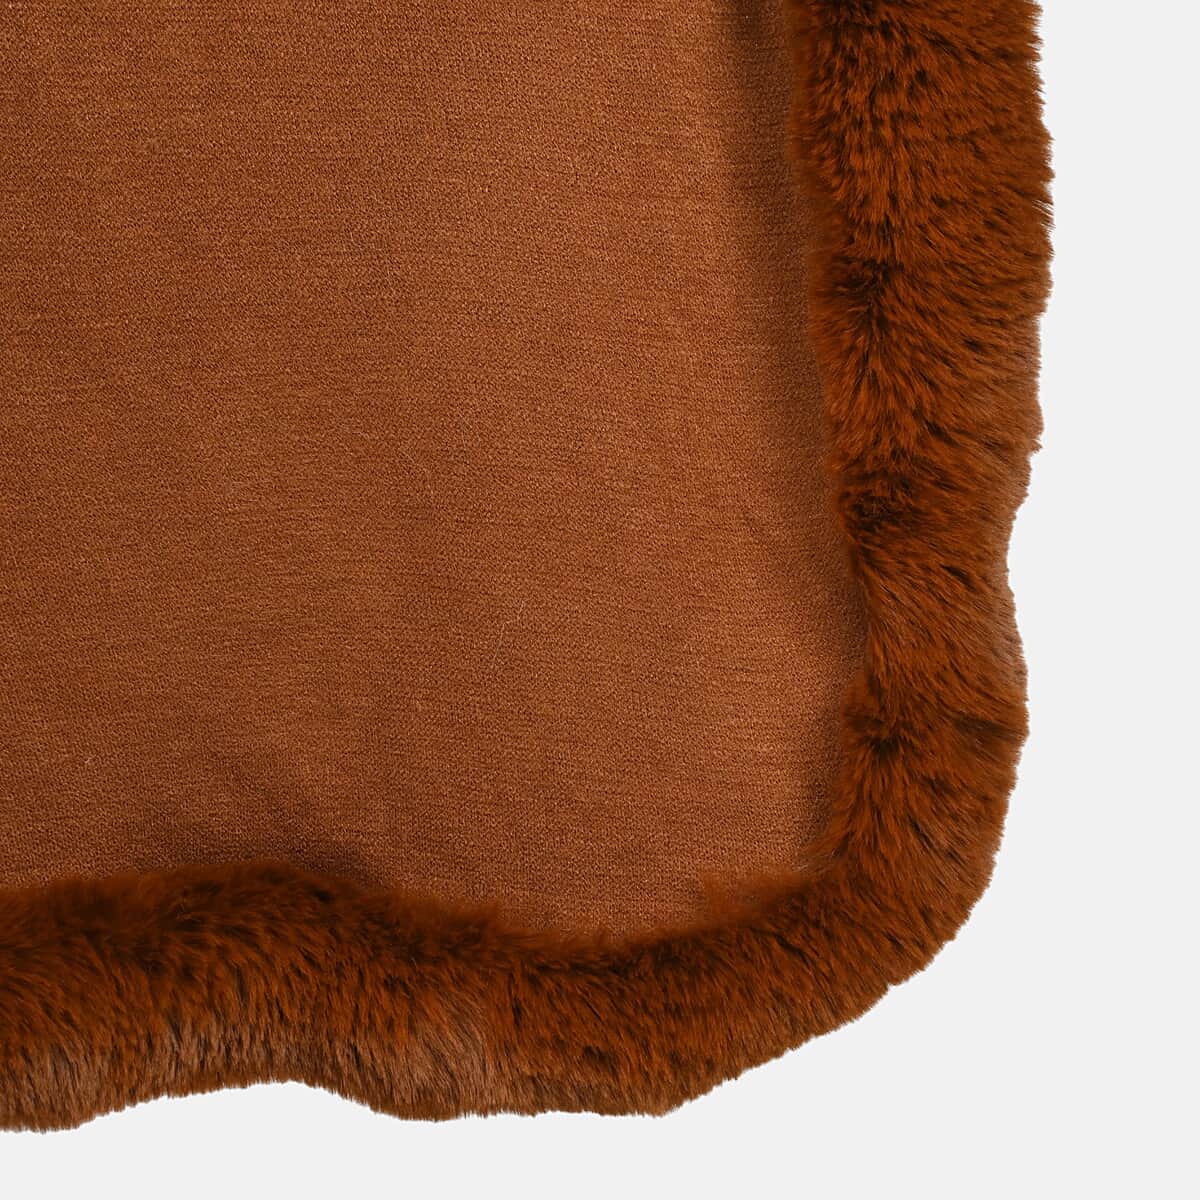 Tamsy Cognac Ruana with Faux Fur Trim - One Size Fits Most image number 4